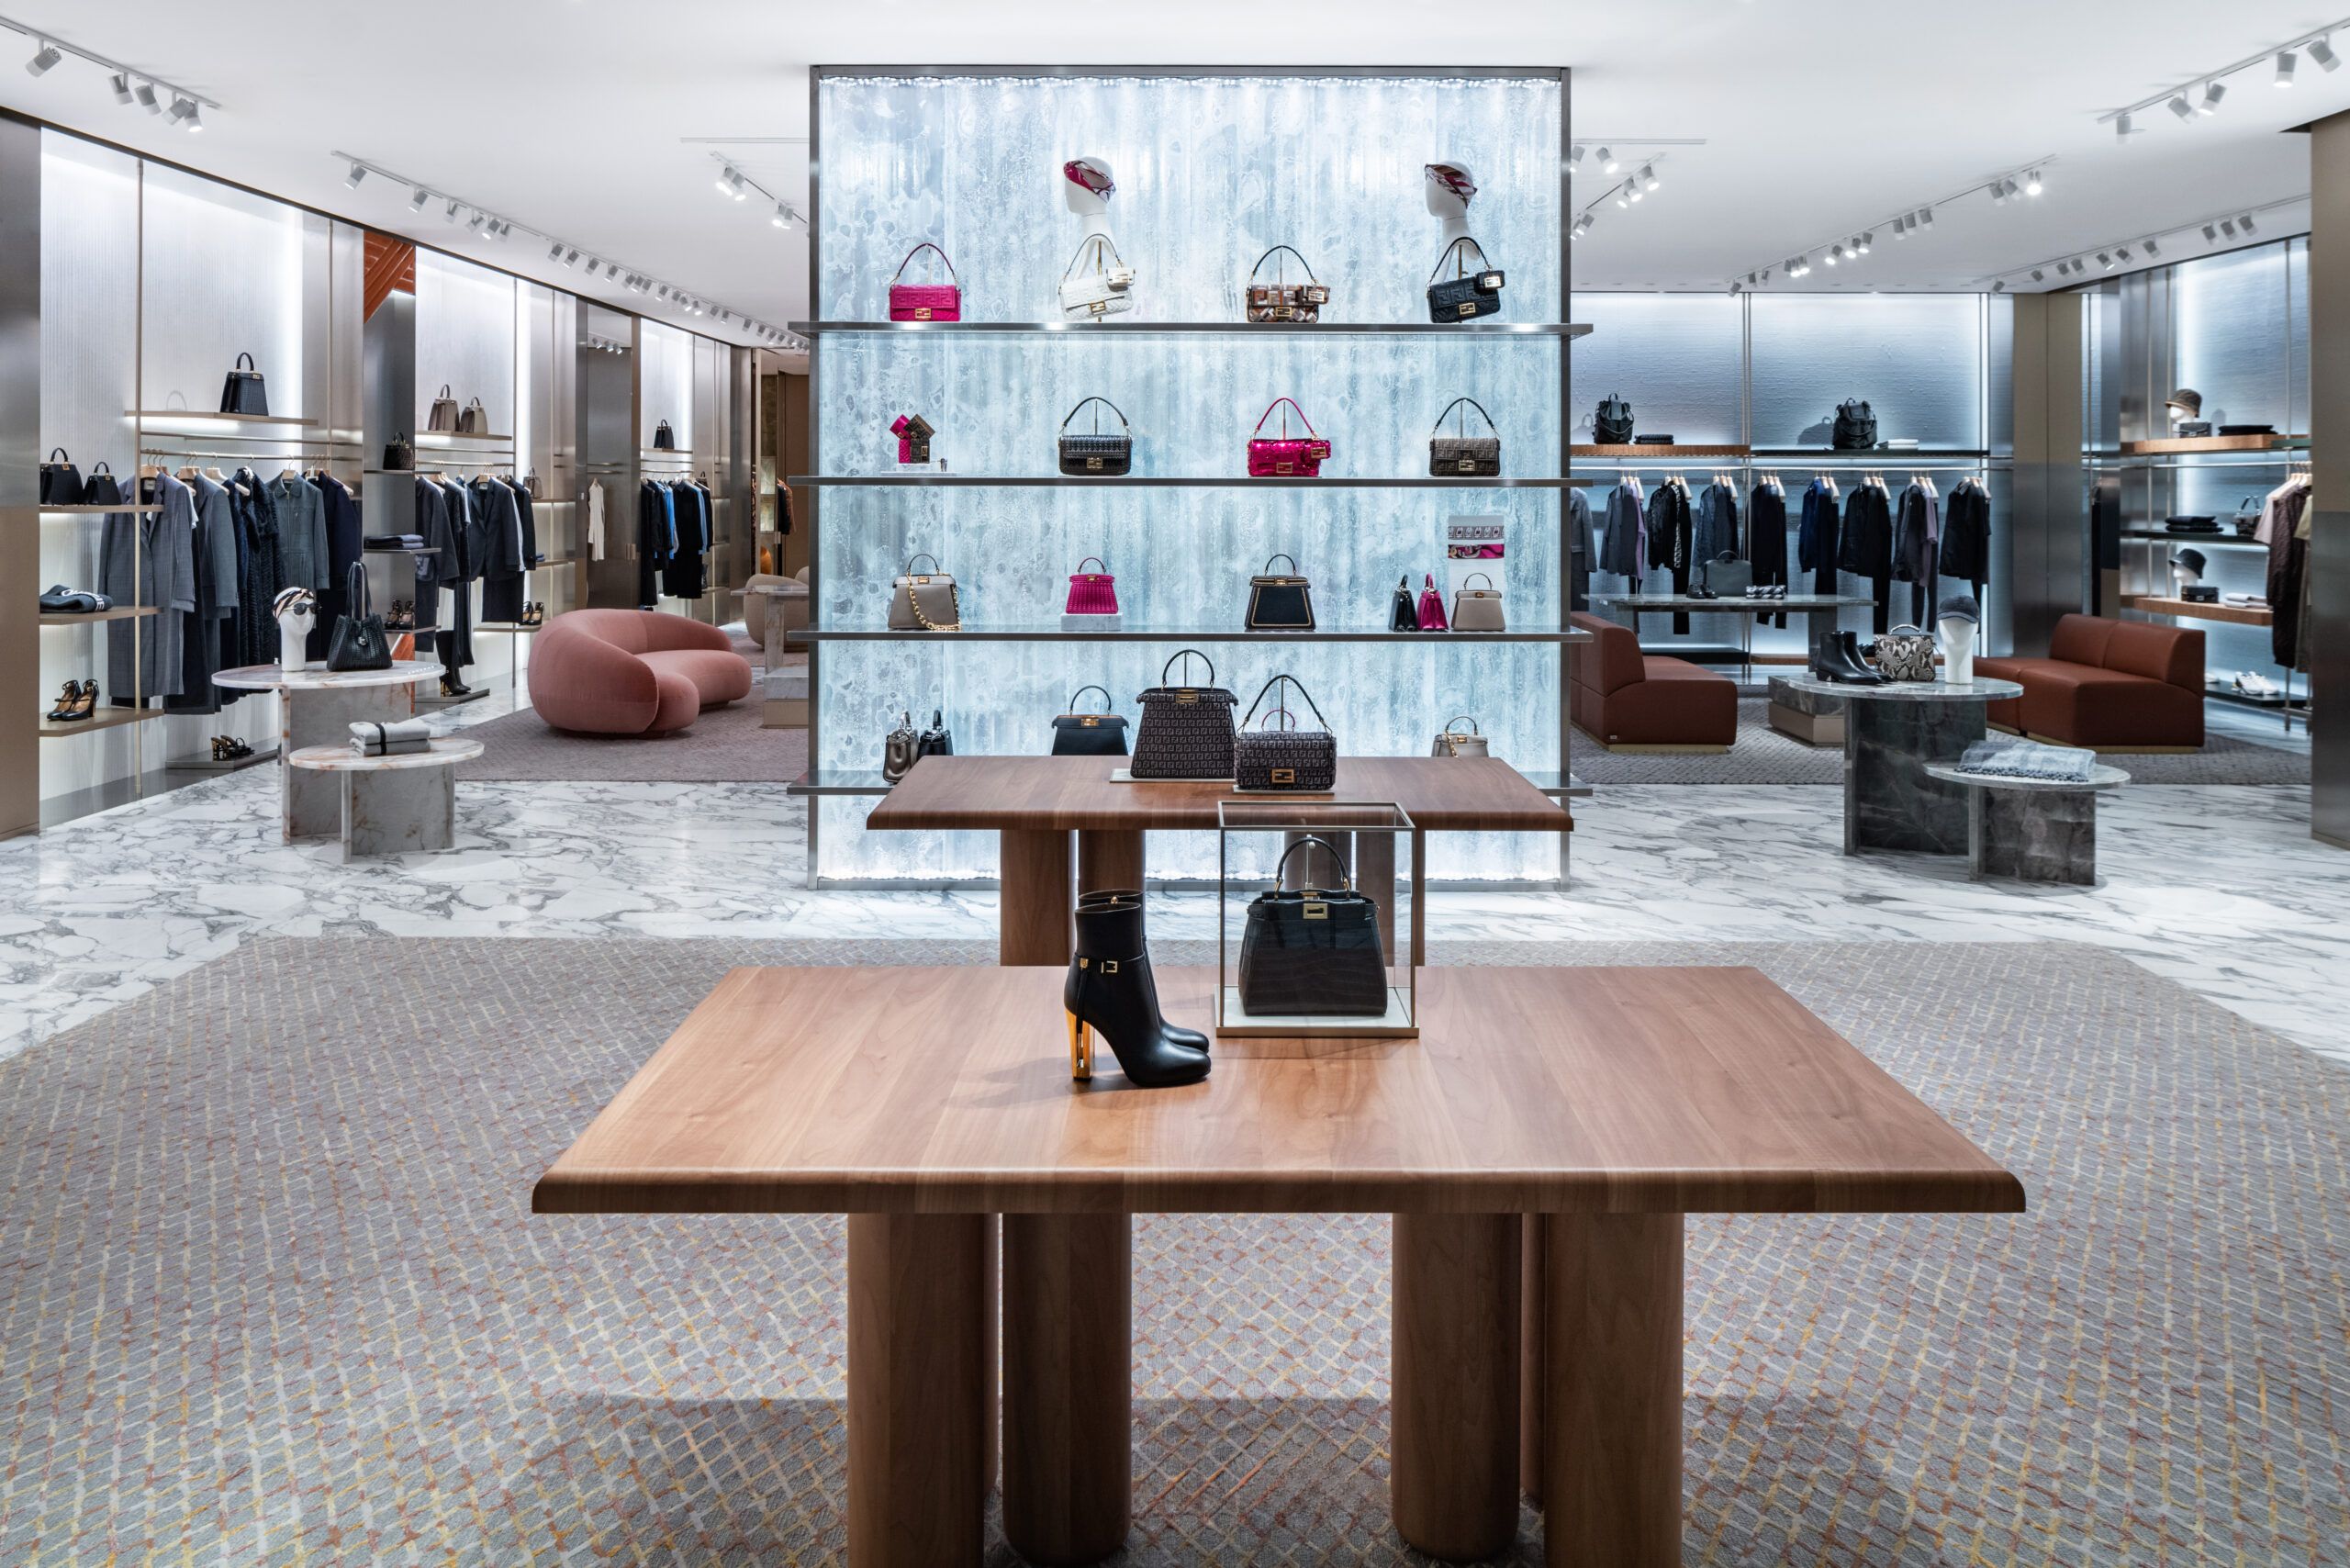 Phipps Plaza's new GIVENCHY boutique features a local